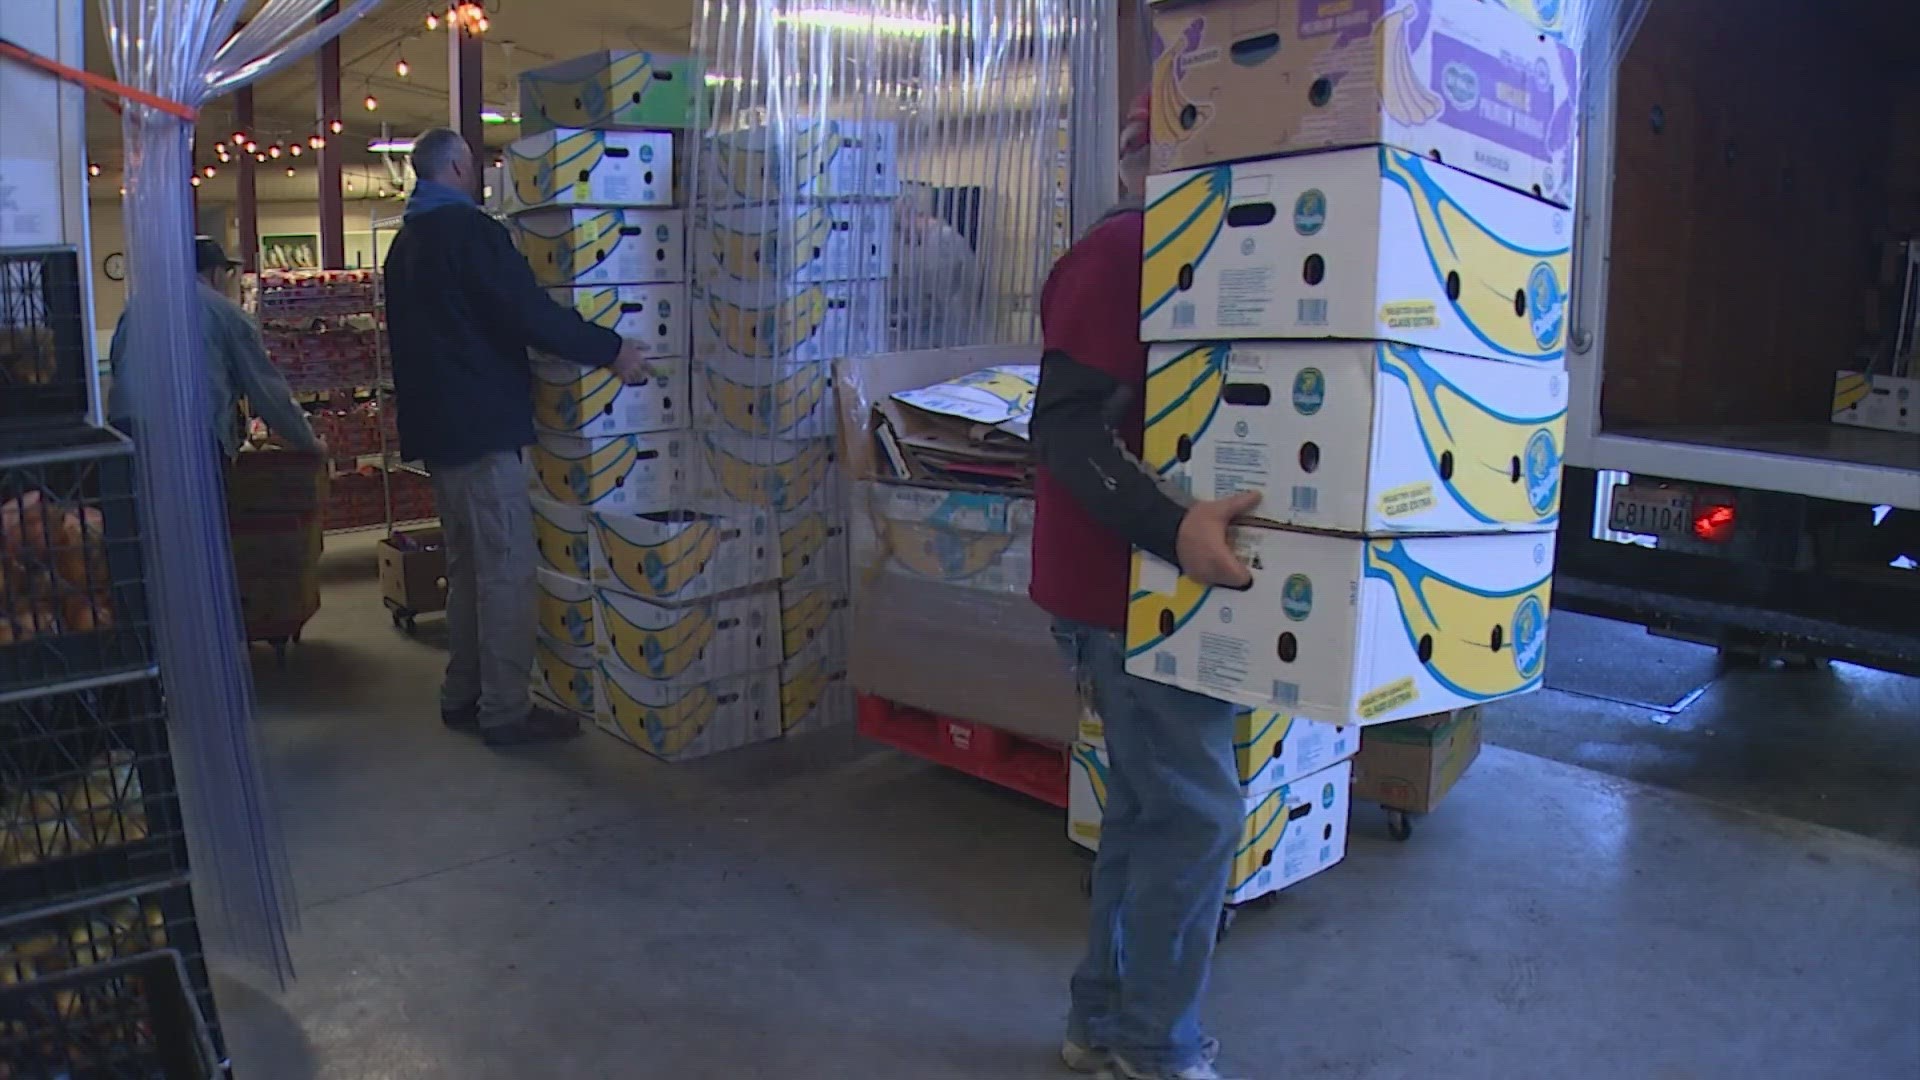 The acts of generosity come as Snohomish County announces $3 million to help food banks keep their shelves stocked.